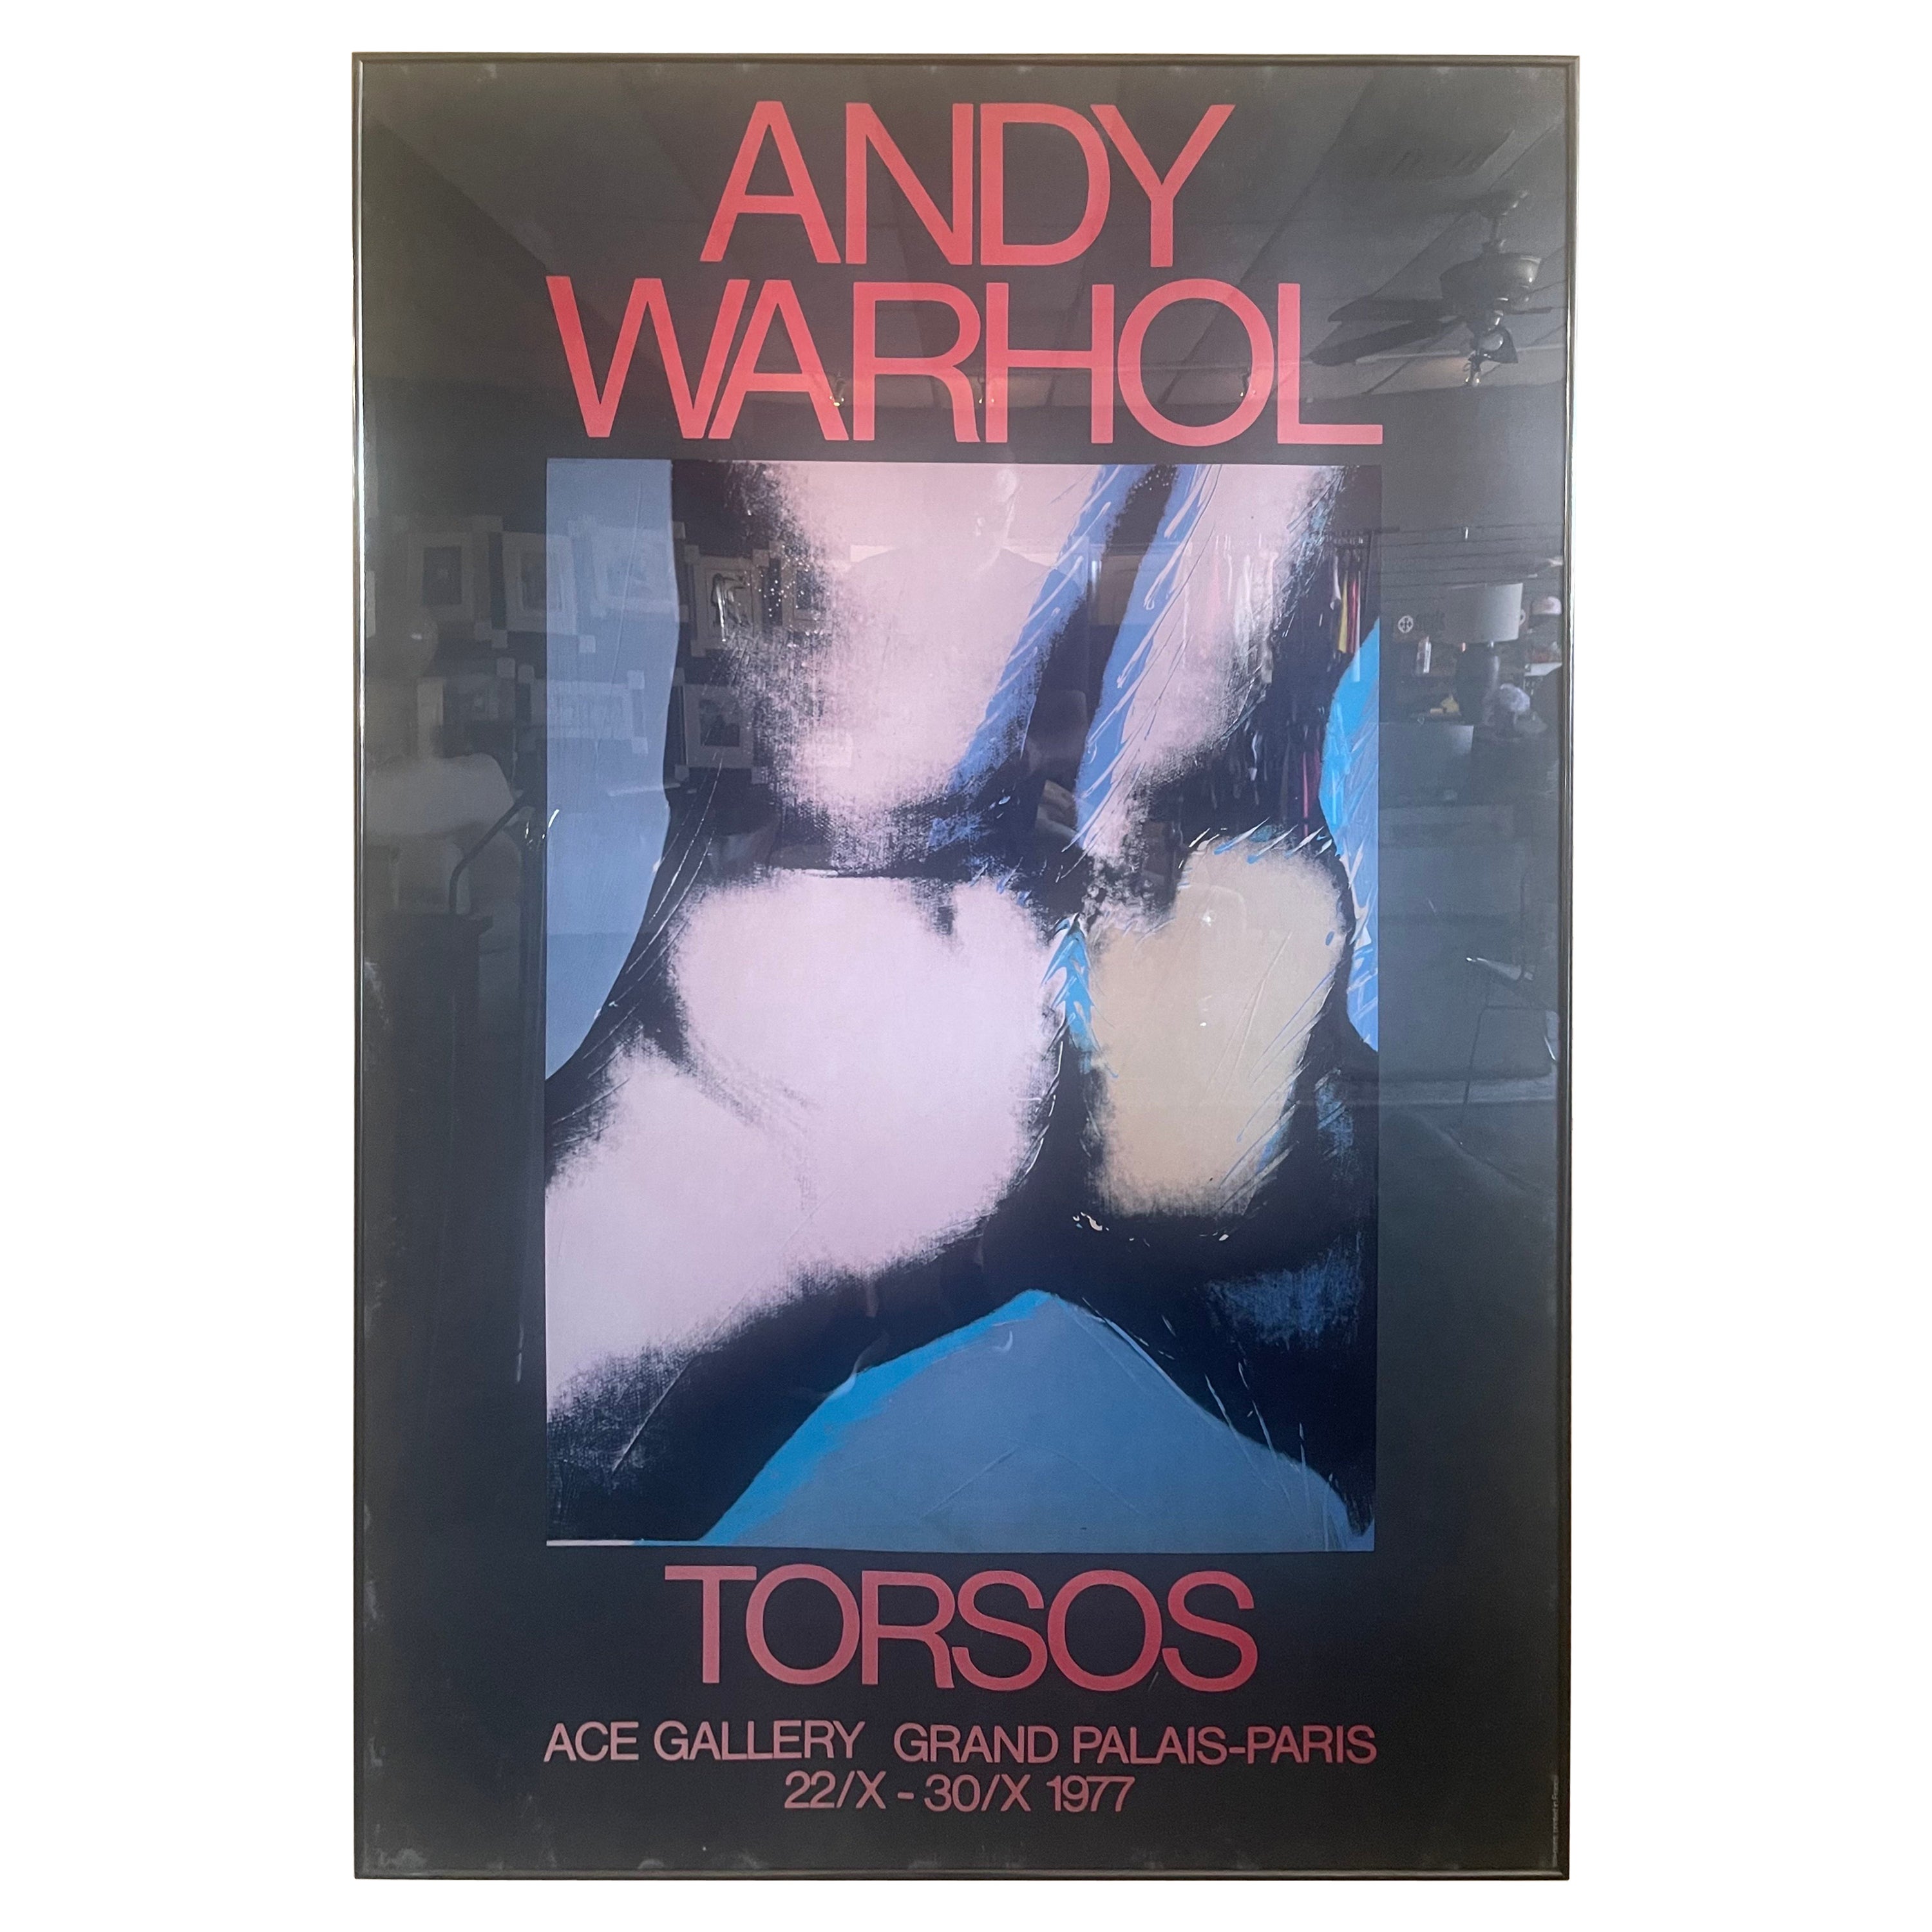 Massive After Andy Warhol "Torso" Poster Ace Gallery Paris, 1977